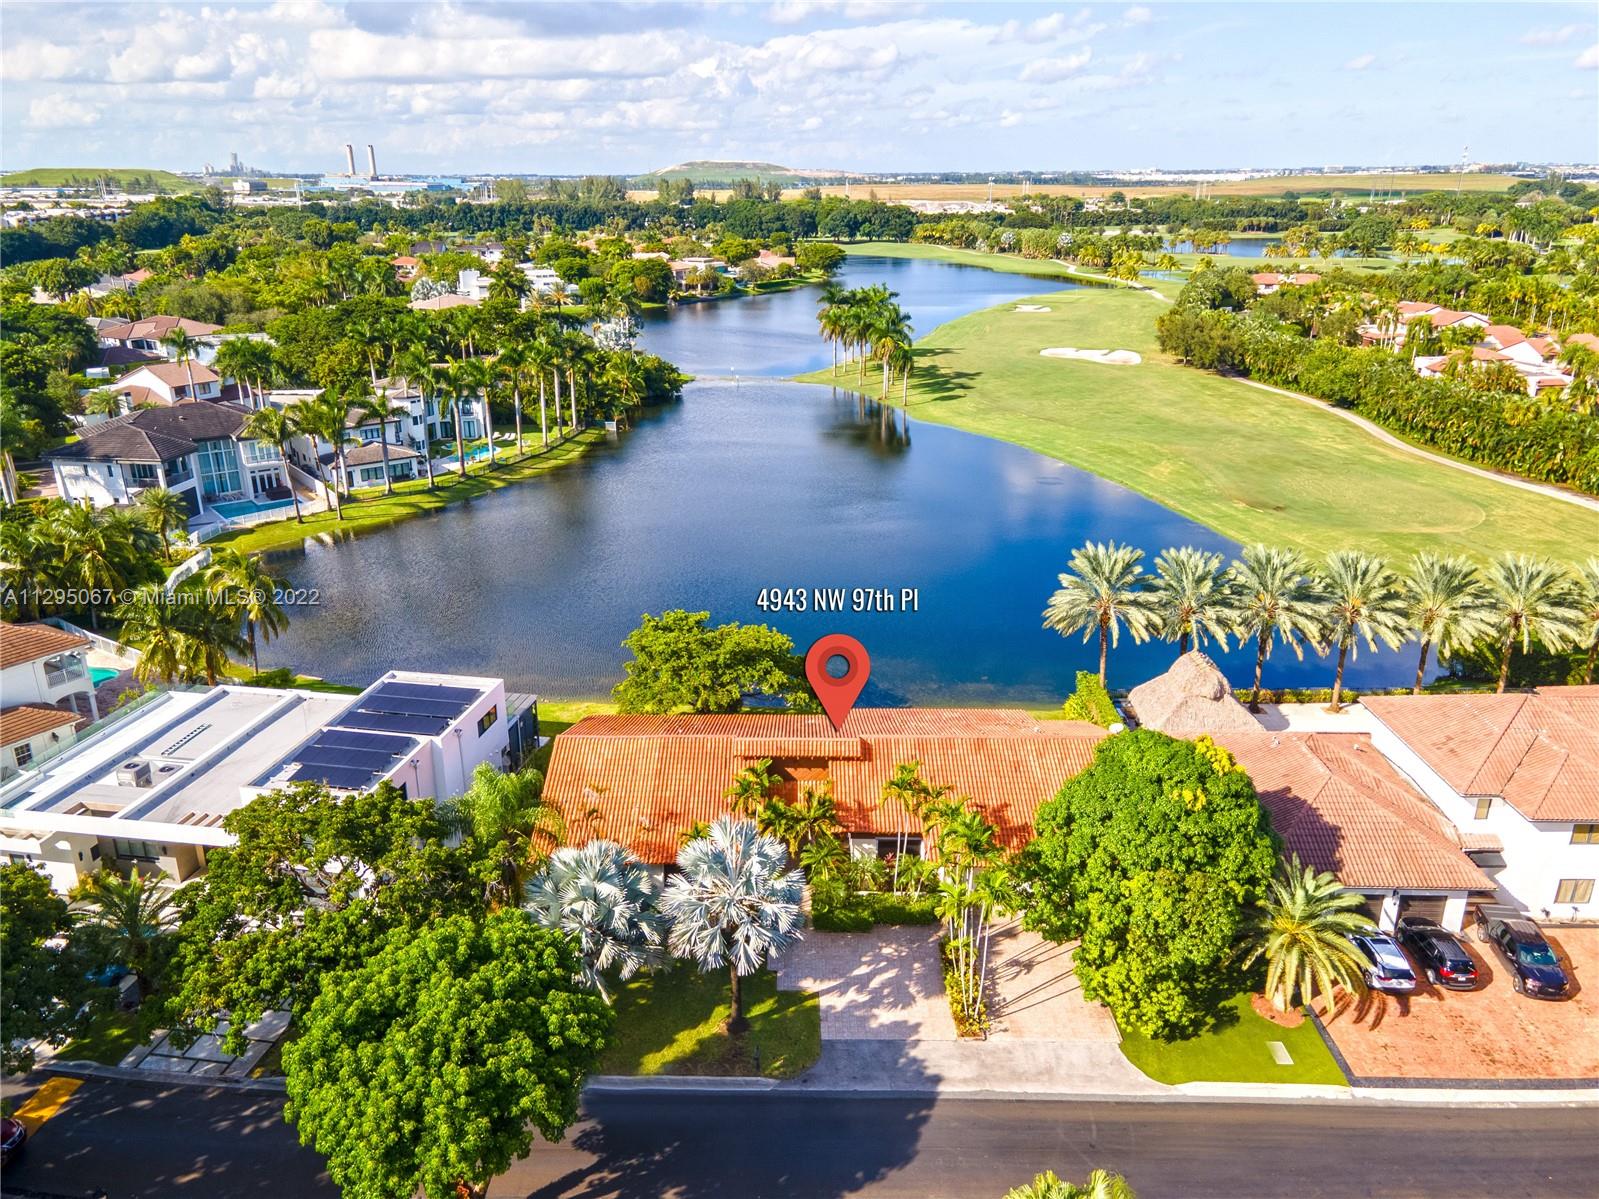 Enjoy the most beautiful view in the heart of doral in the prestigious Trump National Doral Golf Club
This gorgeous house is the only one available now with the incredible lake and golf view, this is a 5,265 sqft and a lot of 15.600, 24 hours gate entry/exit , brand new A/C.
Come and see this amazing rustic luxury, lovely high ceiling with a lot of potential it’s a Golfers’ Dream!, with access drive your golf cart to the Famous Blue Monster.
Furniture is not included but is negotiable.
Request a private tour today, please use showing time.